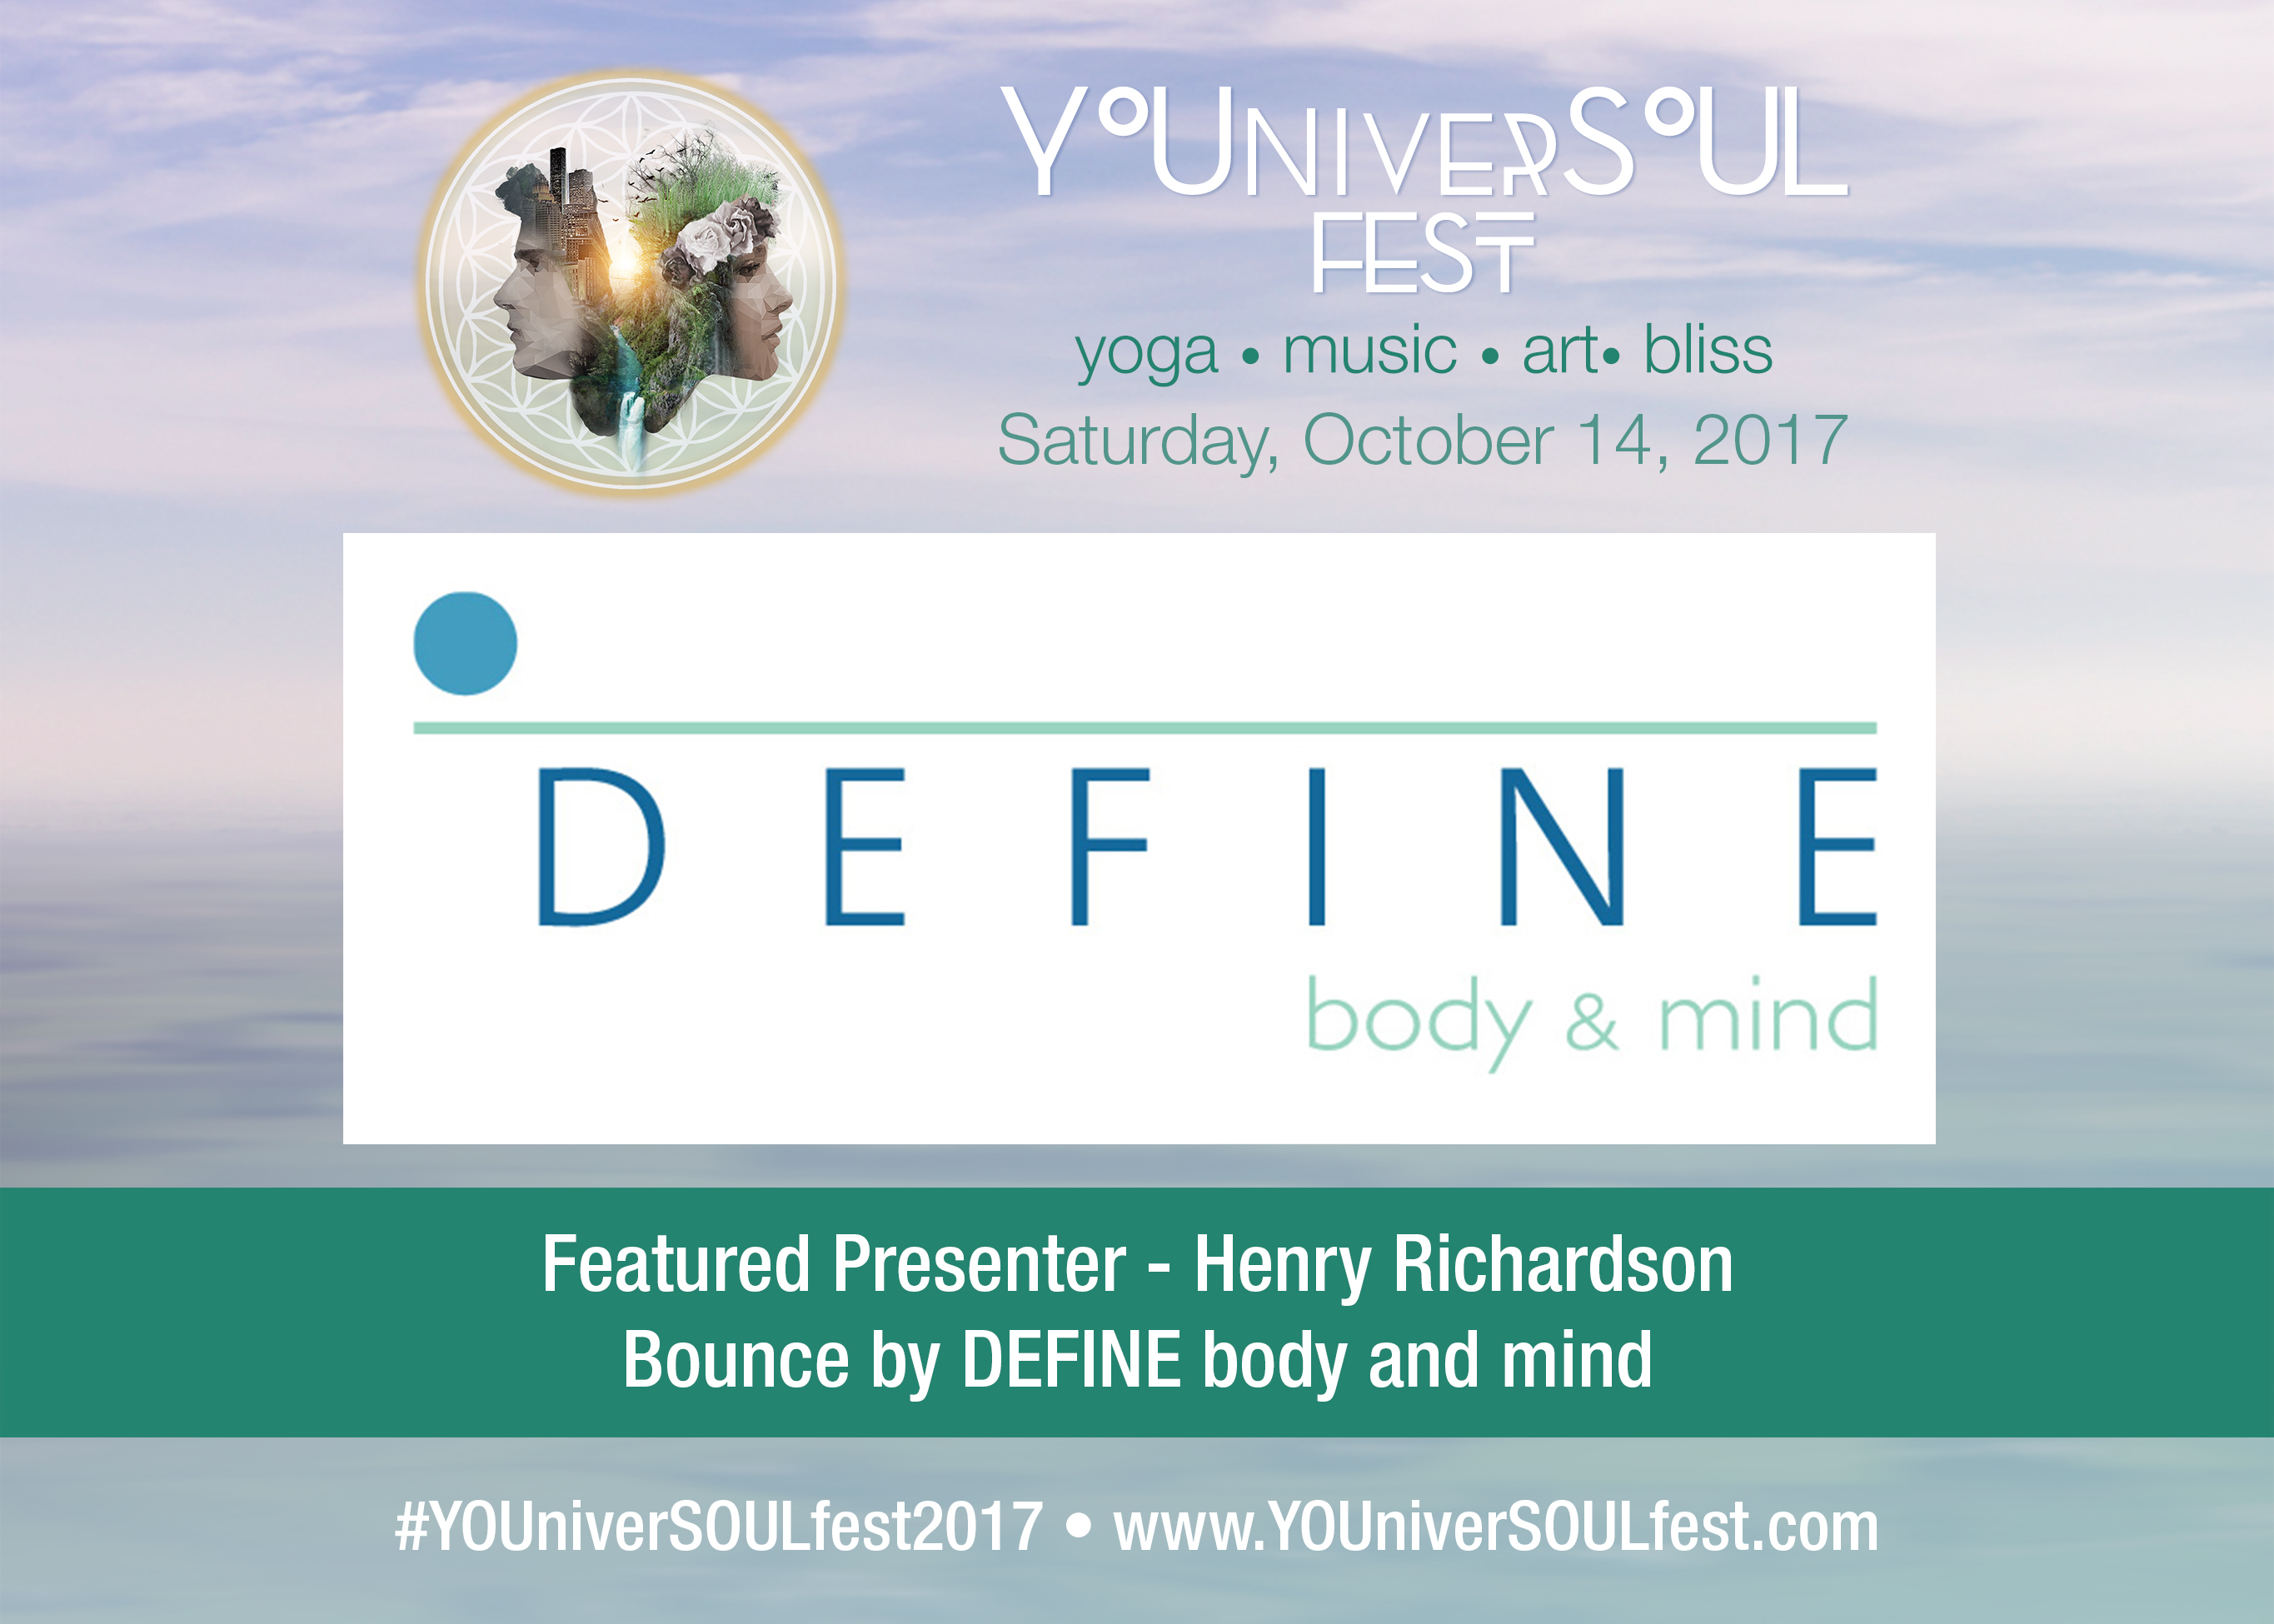 Bounce by Define body and mind featuring Henry Richardson